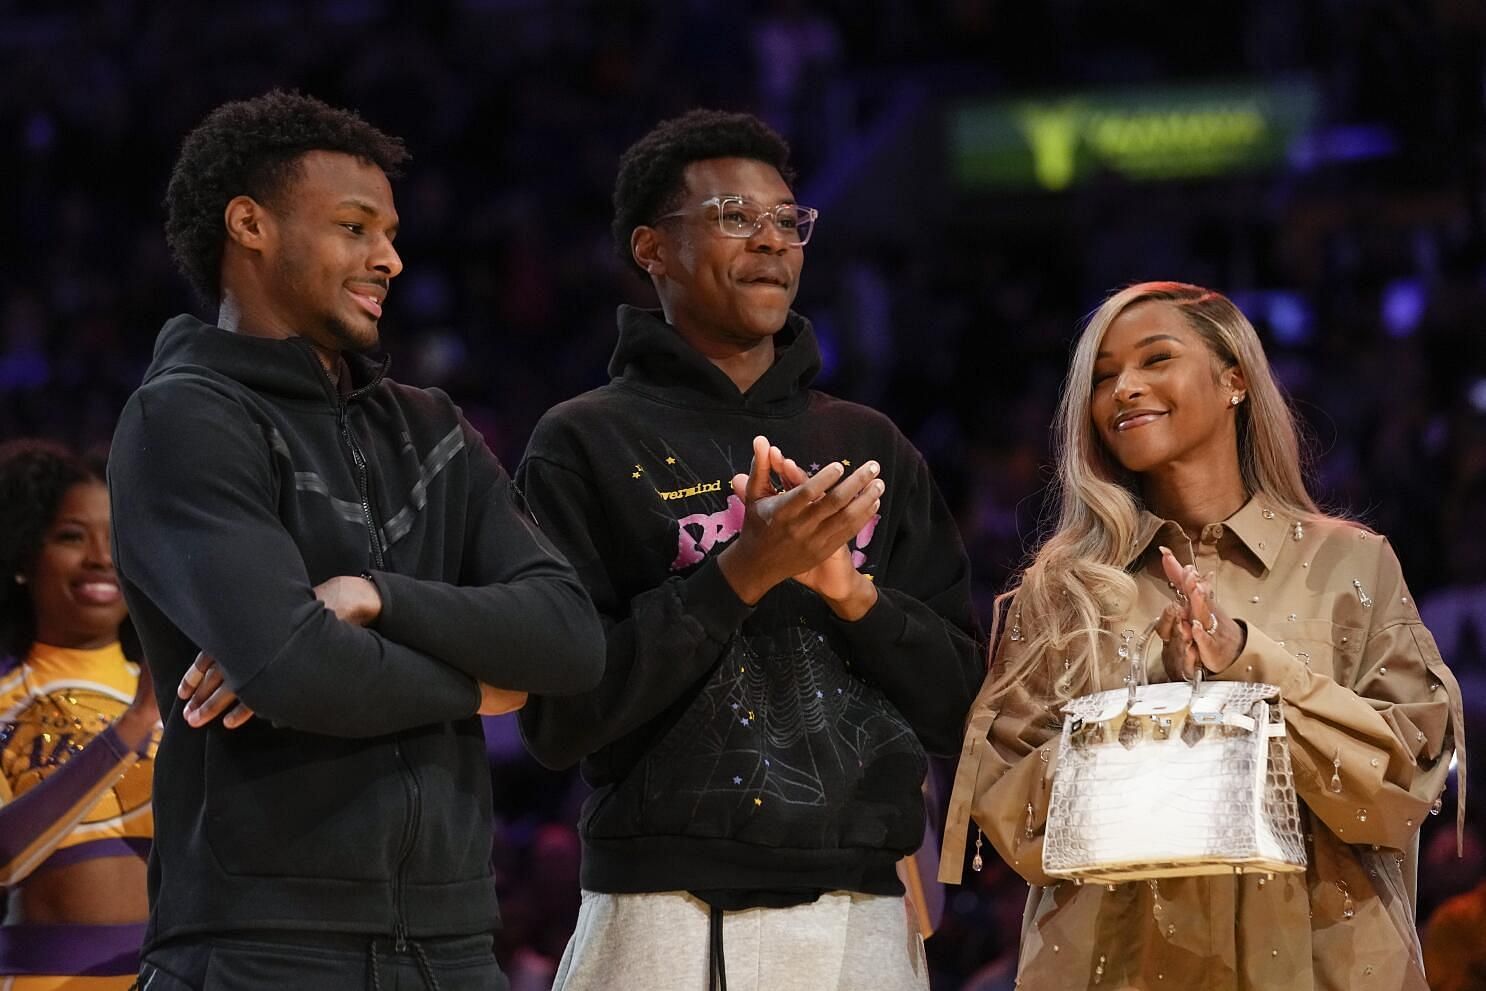 Bryce James is now stepping out of the shadows of his older brother Bronny, and their mom Savannah is happy about it.